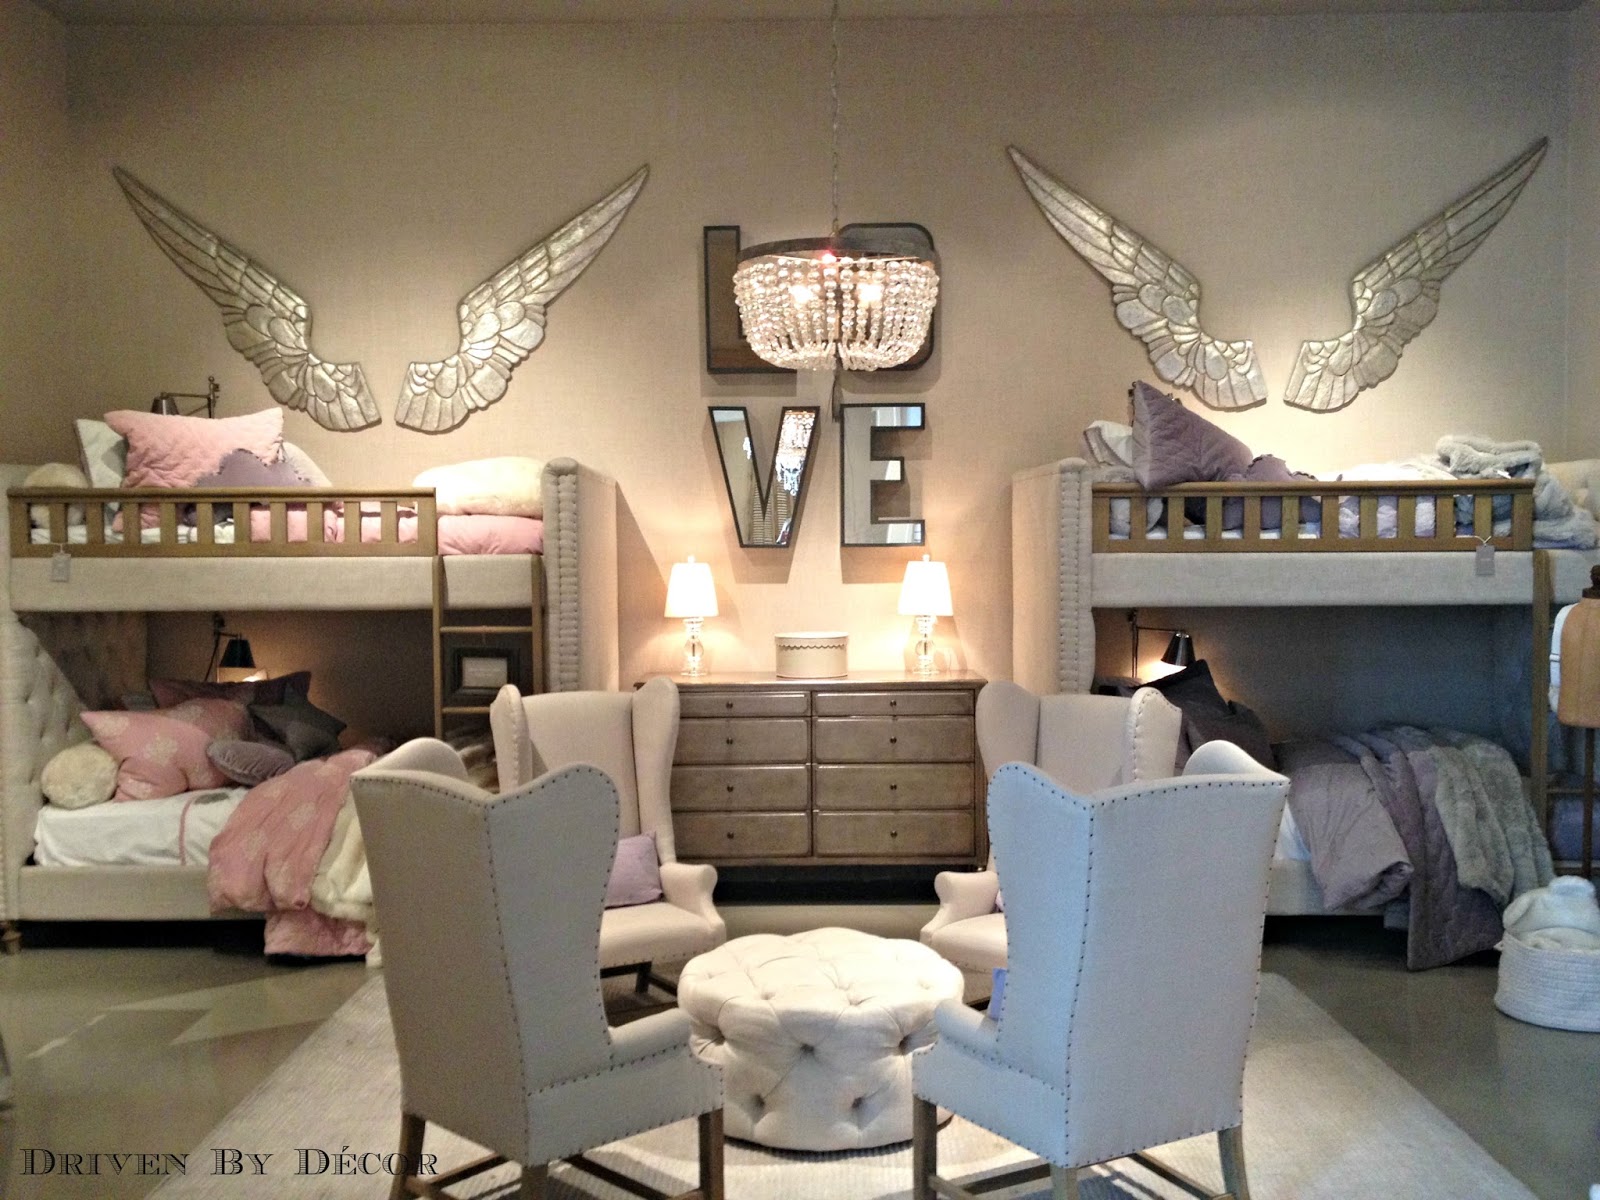 Driven By Décor: Decorating Nurseries & Kids Rooms: Inspiration ...